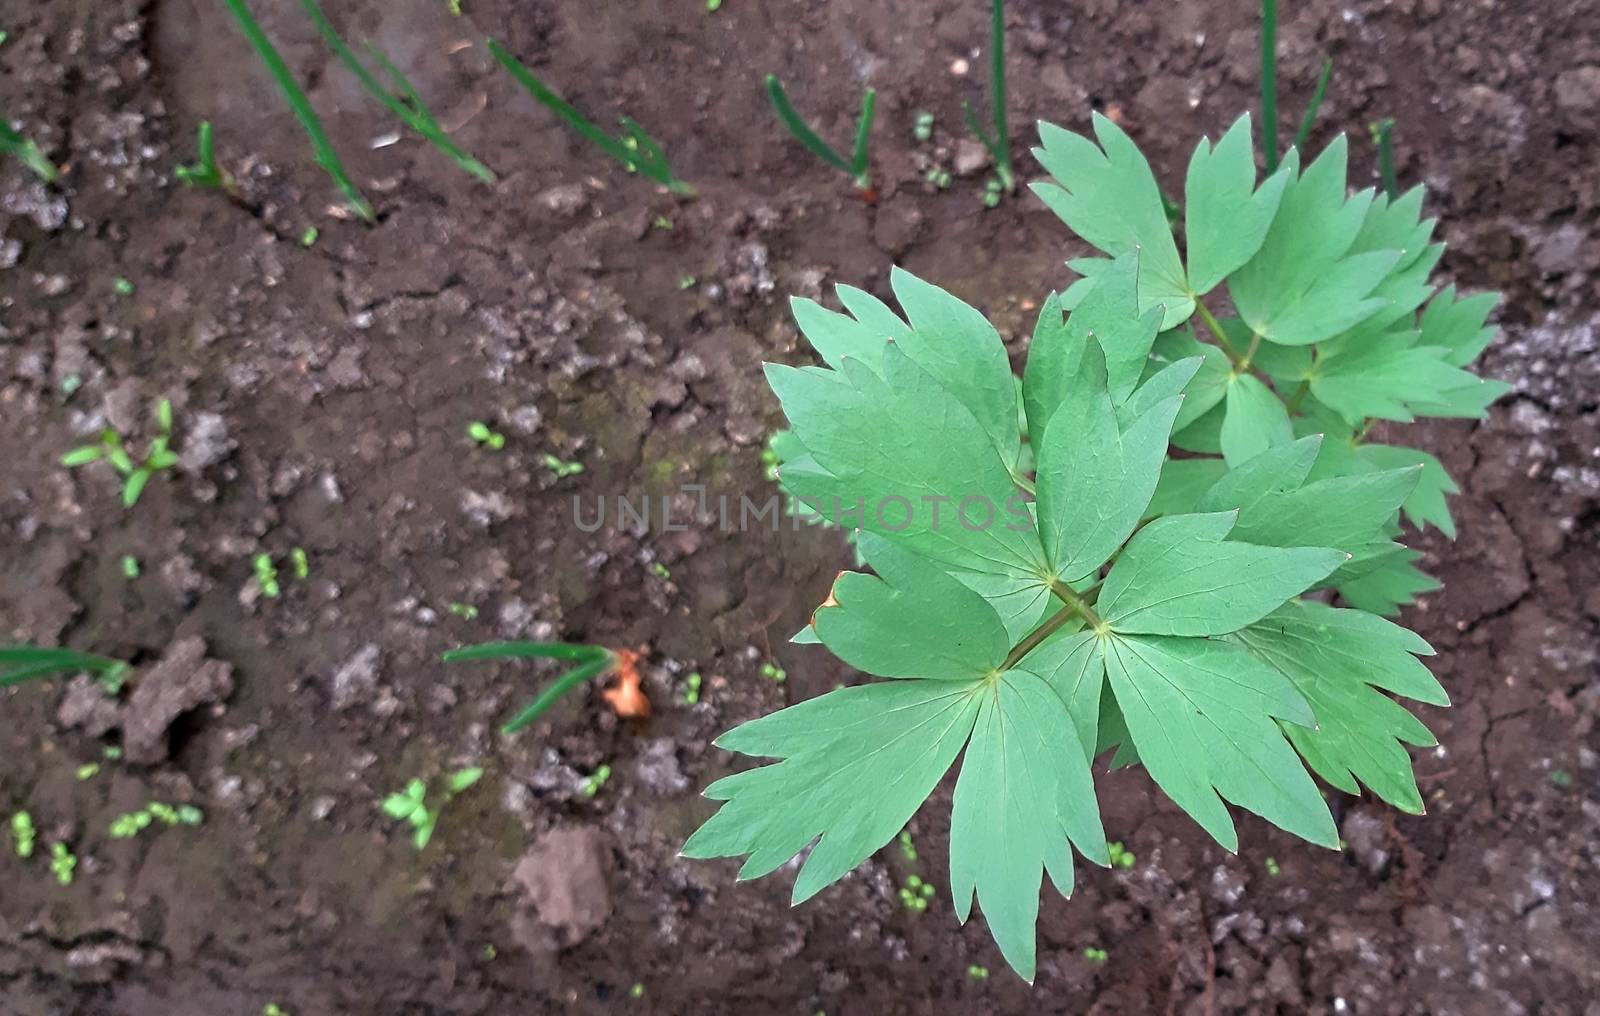 Lovage herb very medicinal plant growing in the garden.